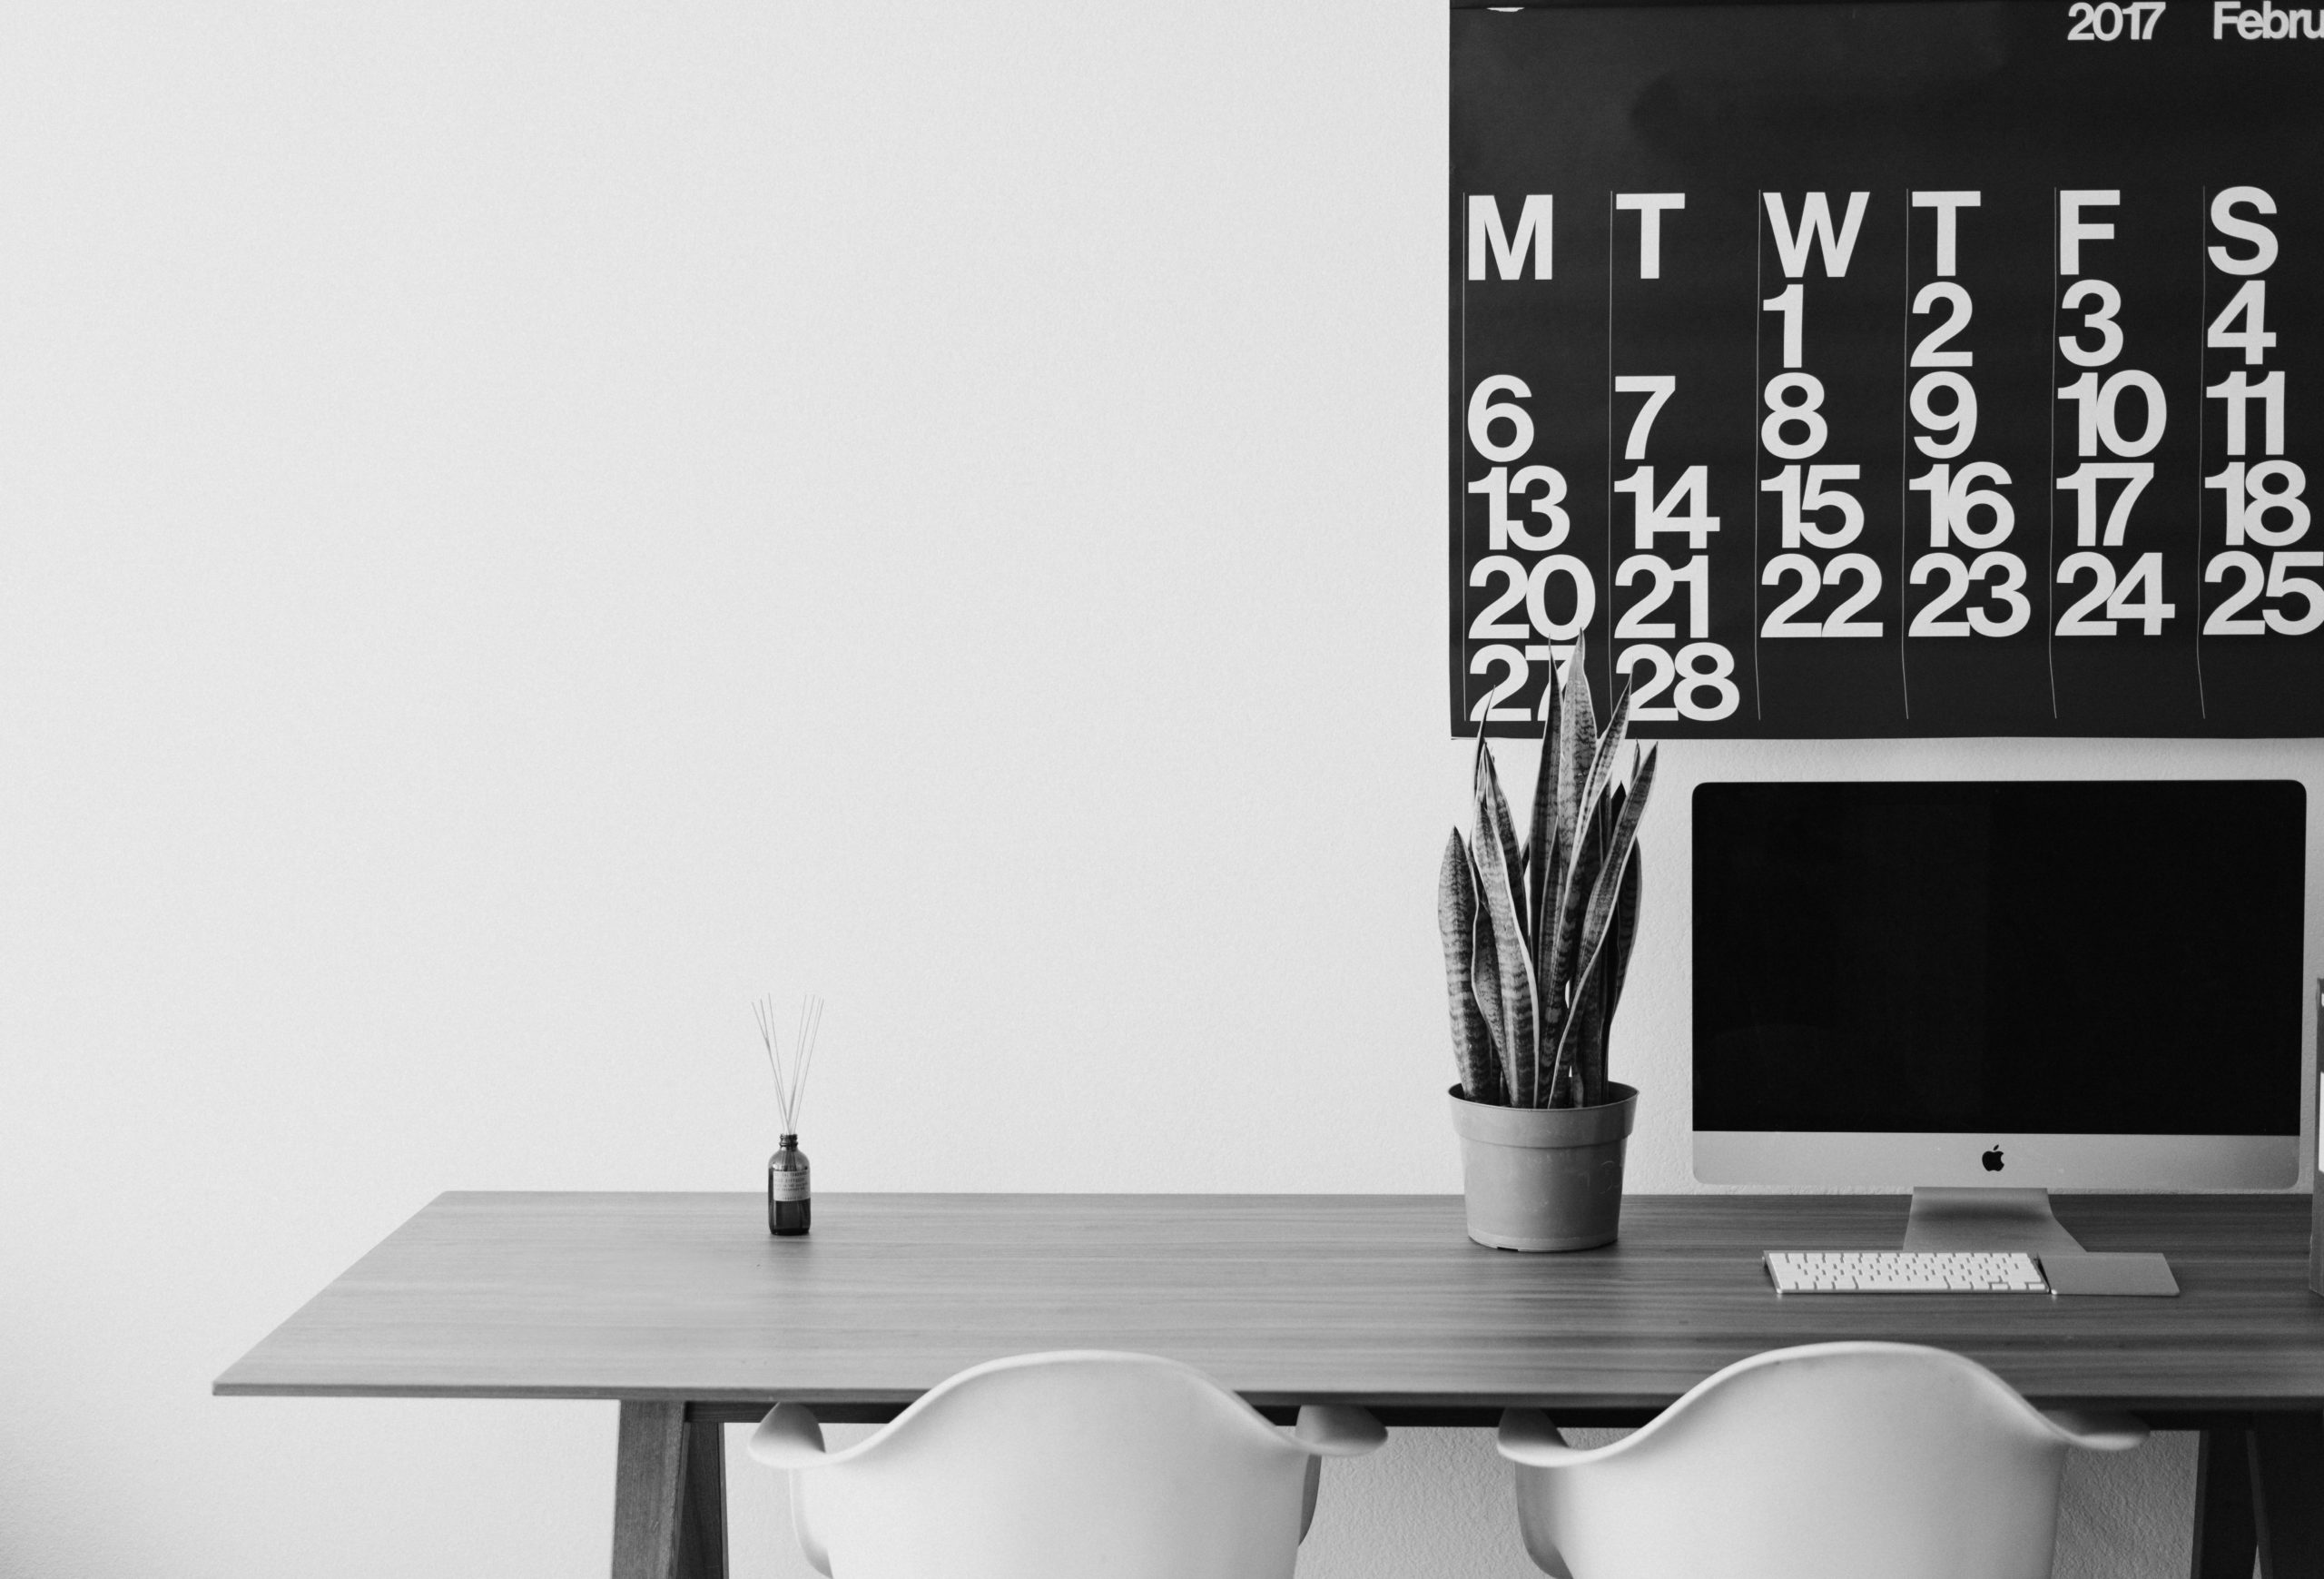 Black and white image of a minimalist desk with calendar on wall